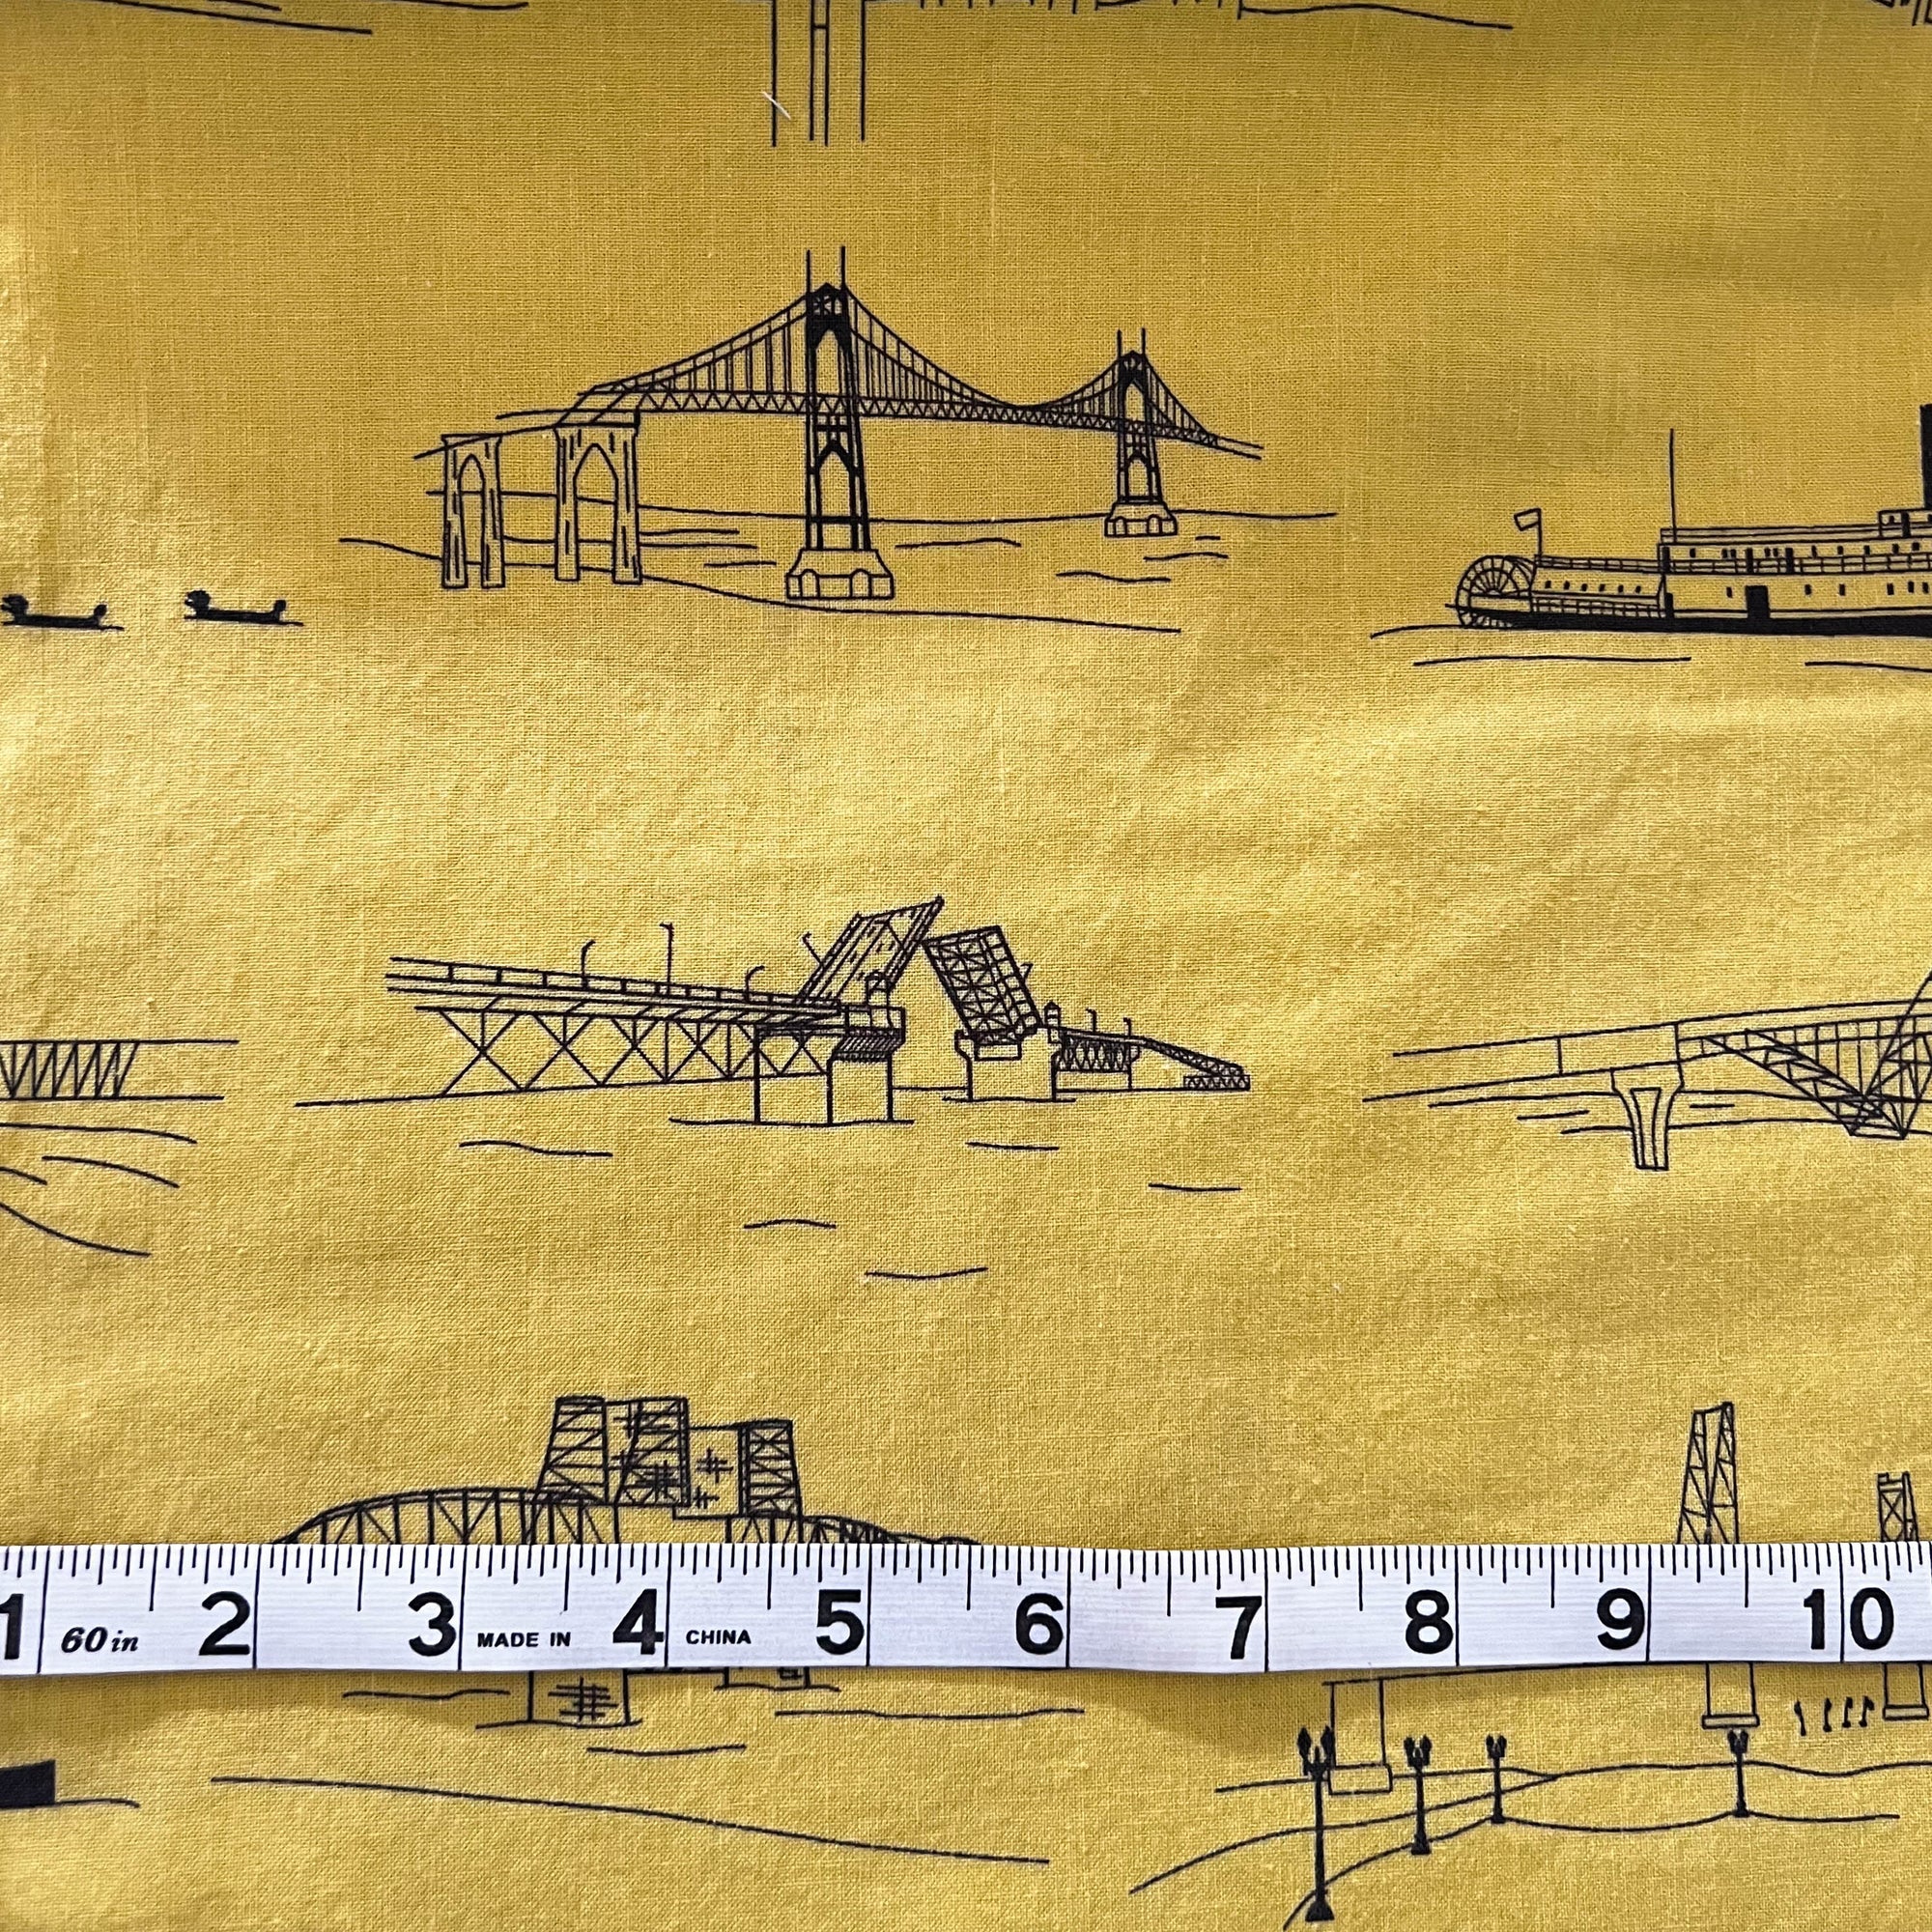 Bridgetown in Starfruit by Violet Craft - Fabric by the Yard - Out of Print